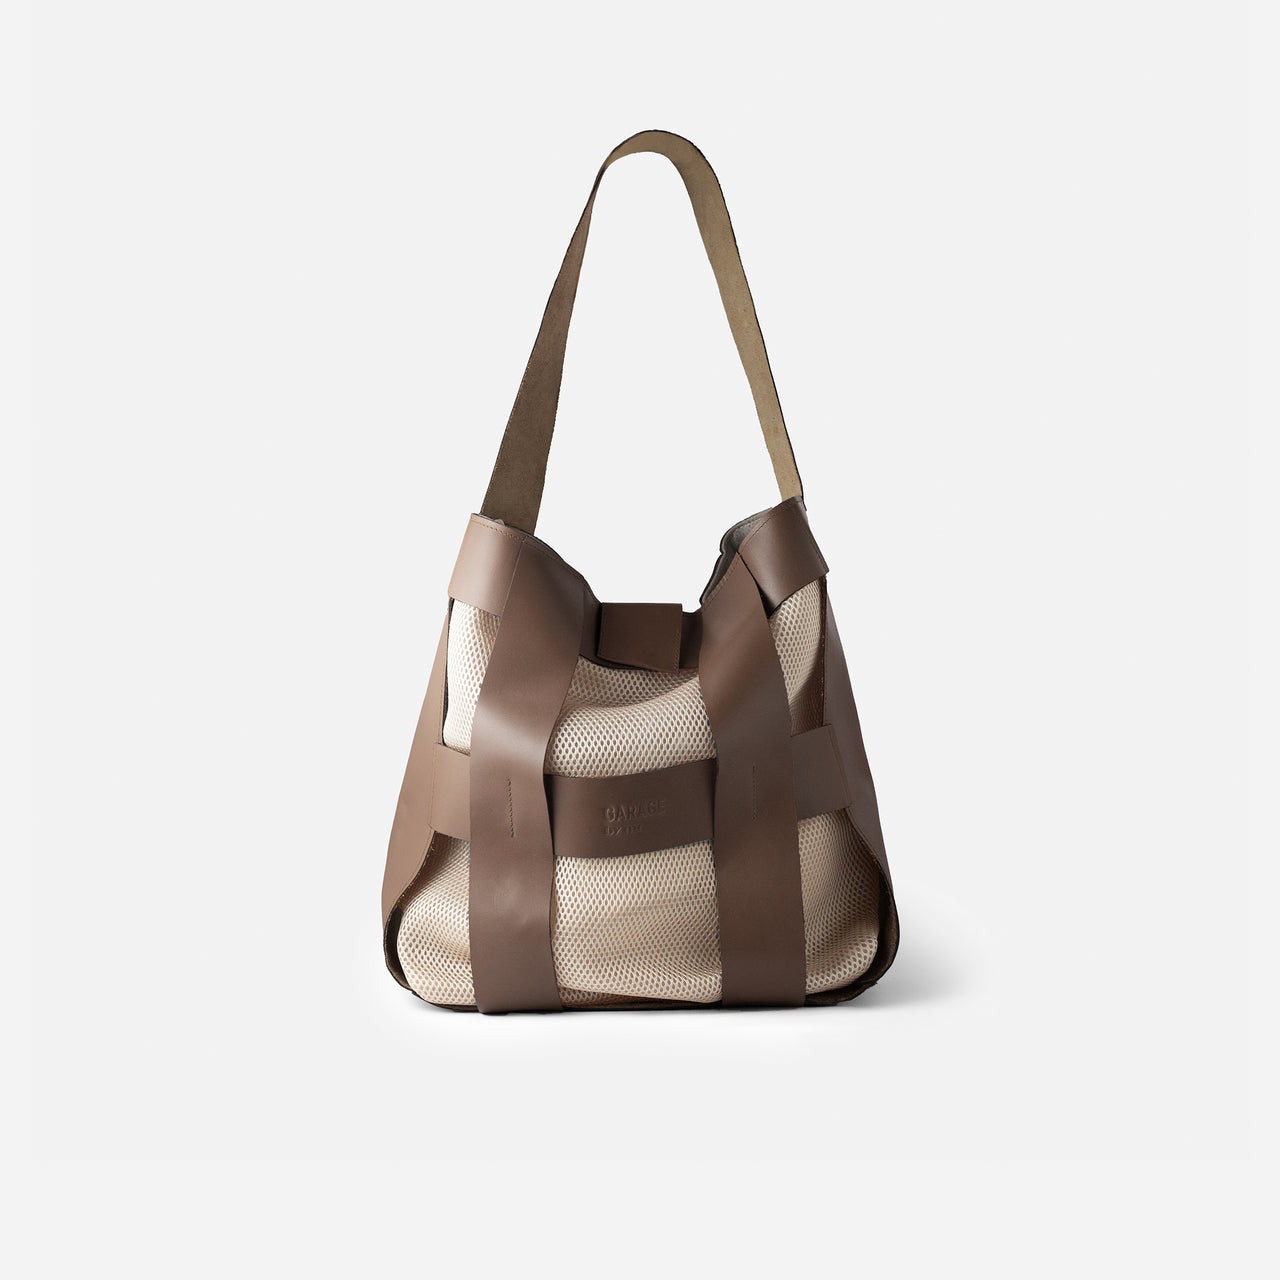 LEATHER STRIPES BUCKET BAG . BROWN